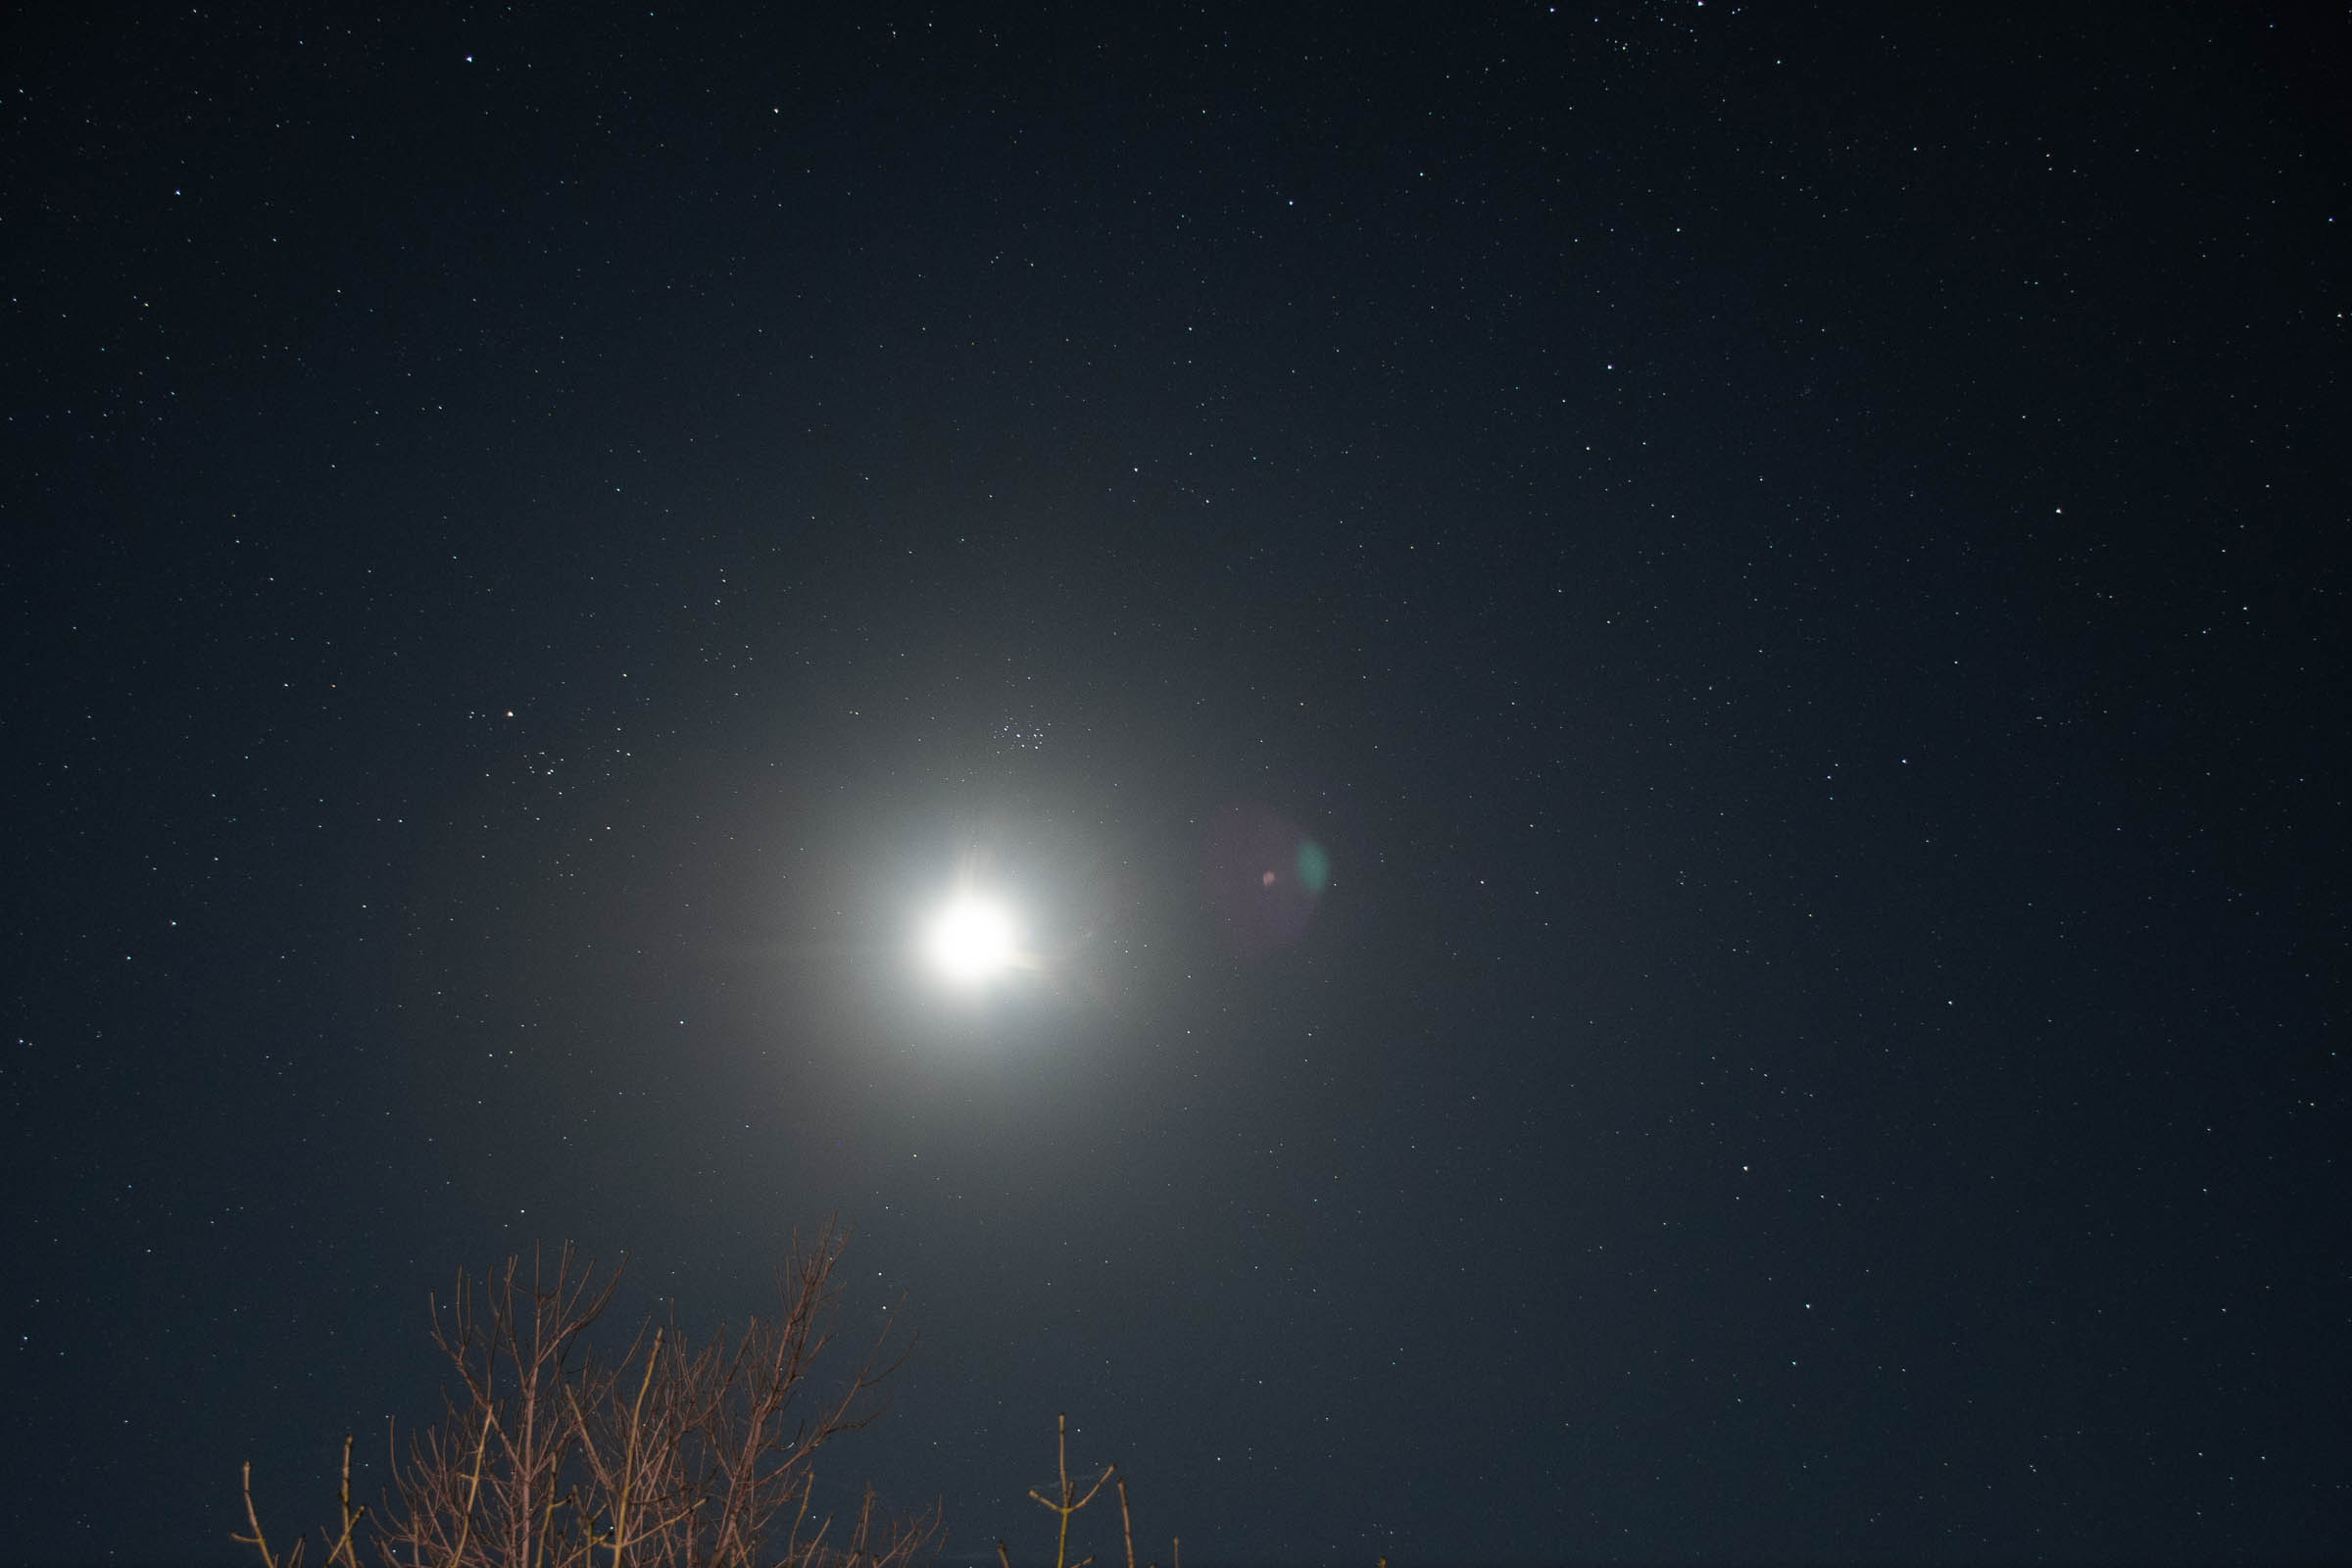 Astrophotograph taken with the Nikon D7500 showing the full moon in the night sky